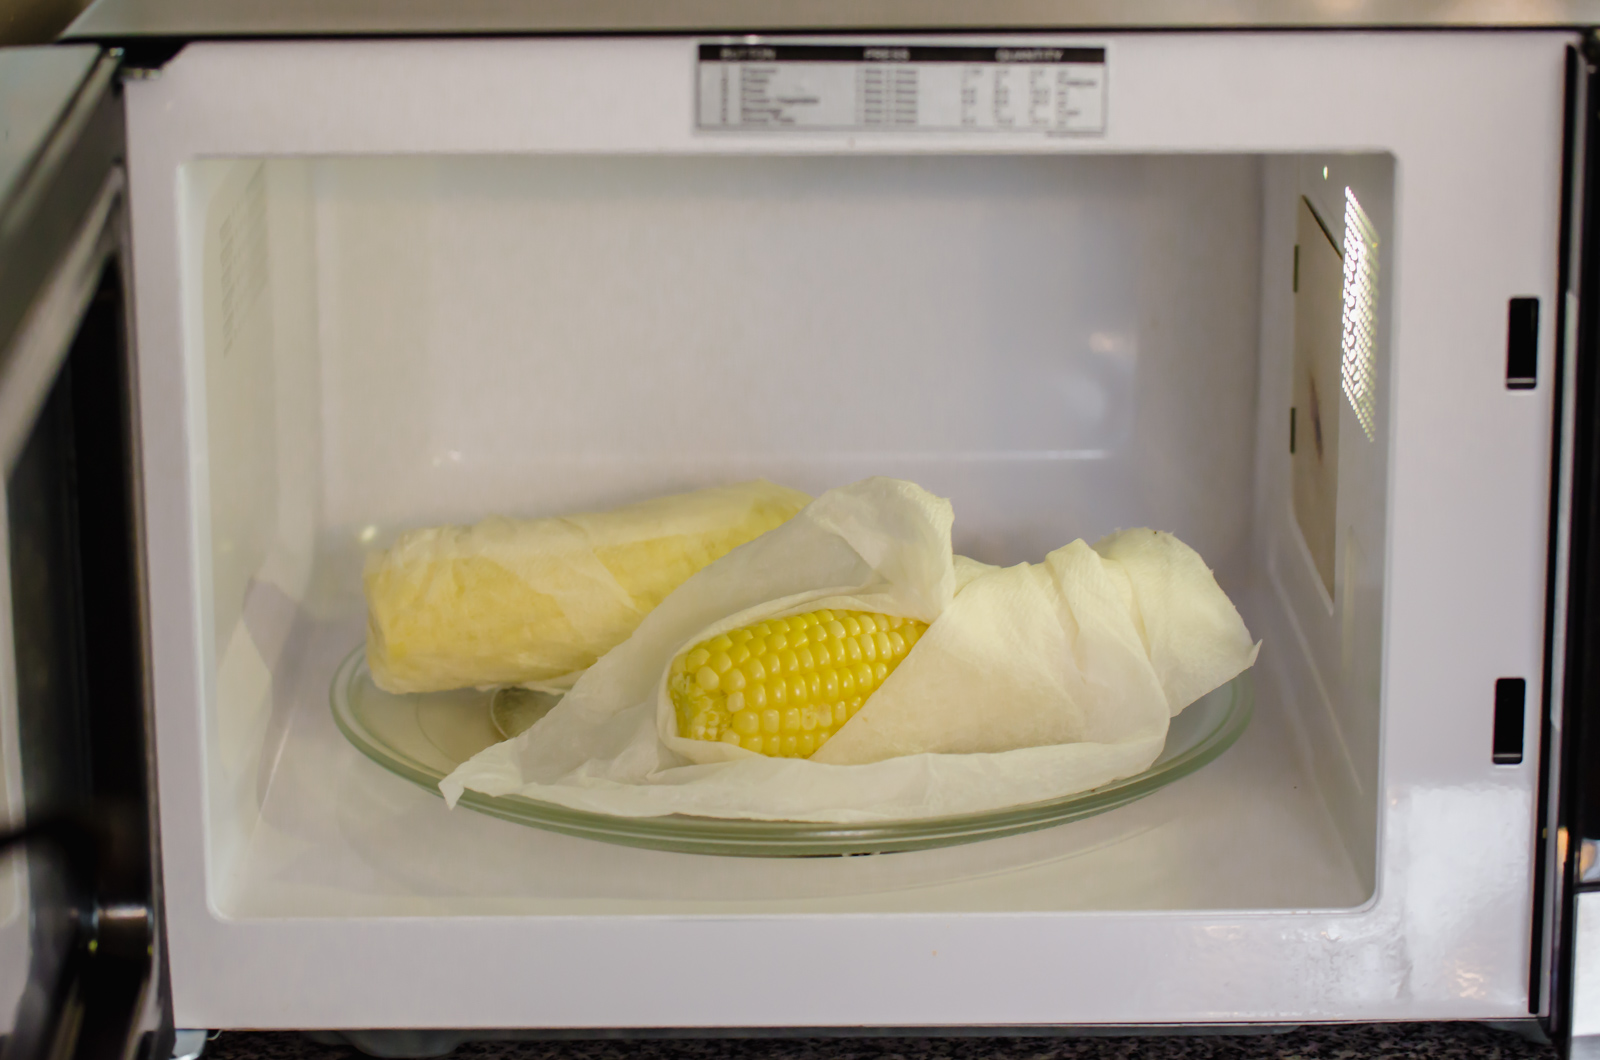 Two ears of corn on the cob wrapped in damp paper towels sitting in a microwave.